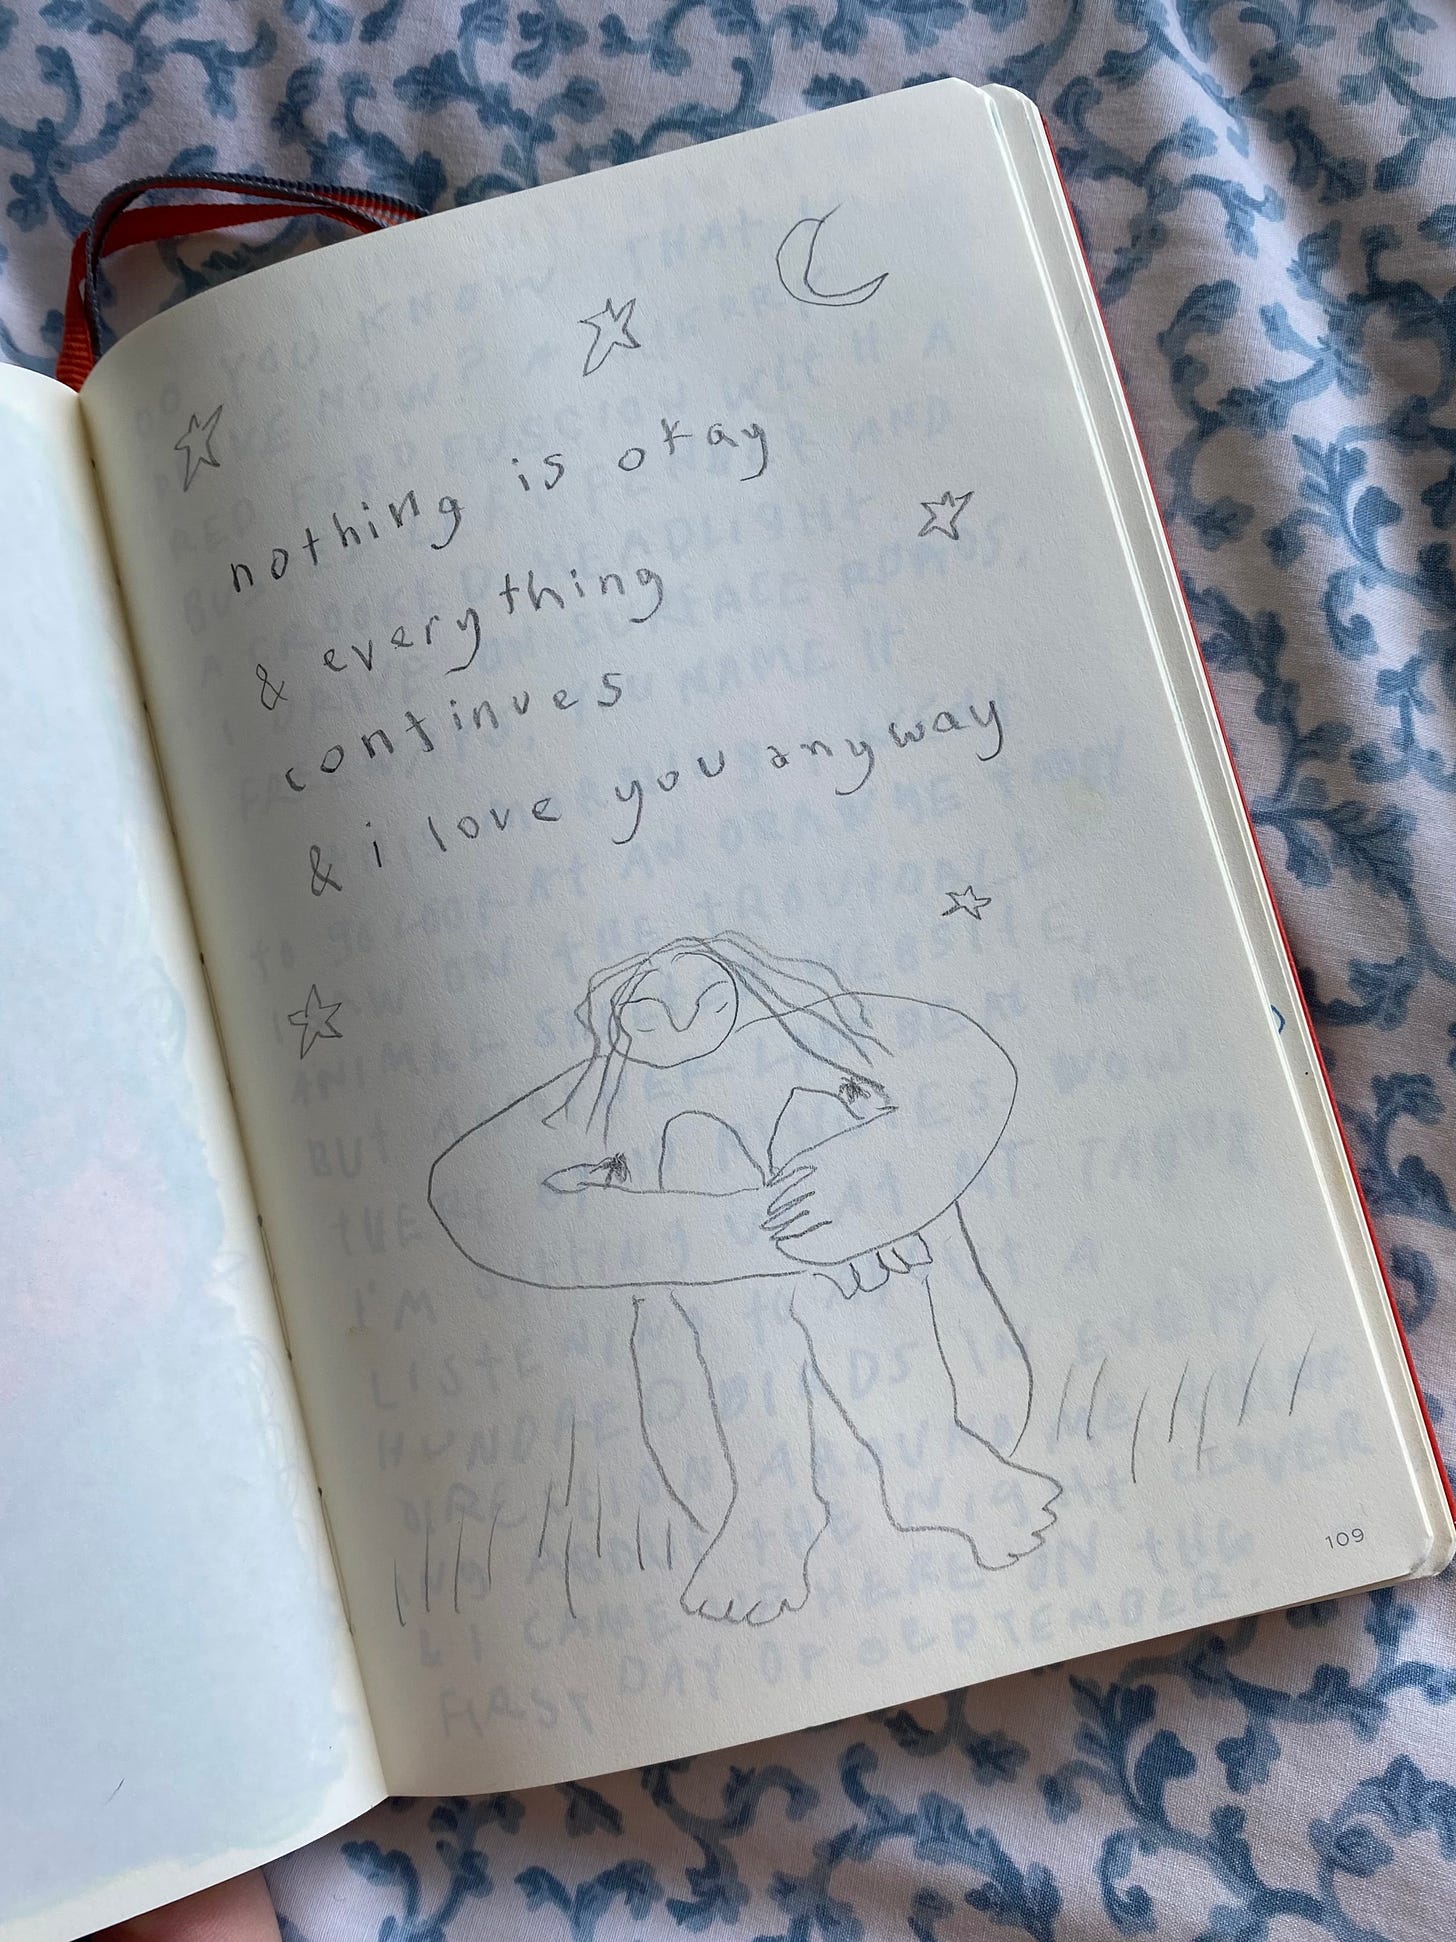 photo of a page from Sage’s journal, which has a drawing of a figure sitting in grass under the moon with their eyes closed and knees up to their chest. above the figure is a poem Sage wrote that reads, “nothing is okay / & everything continues / & i love you anyway”